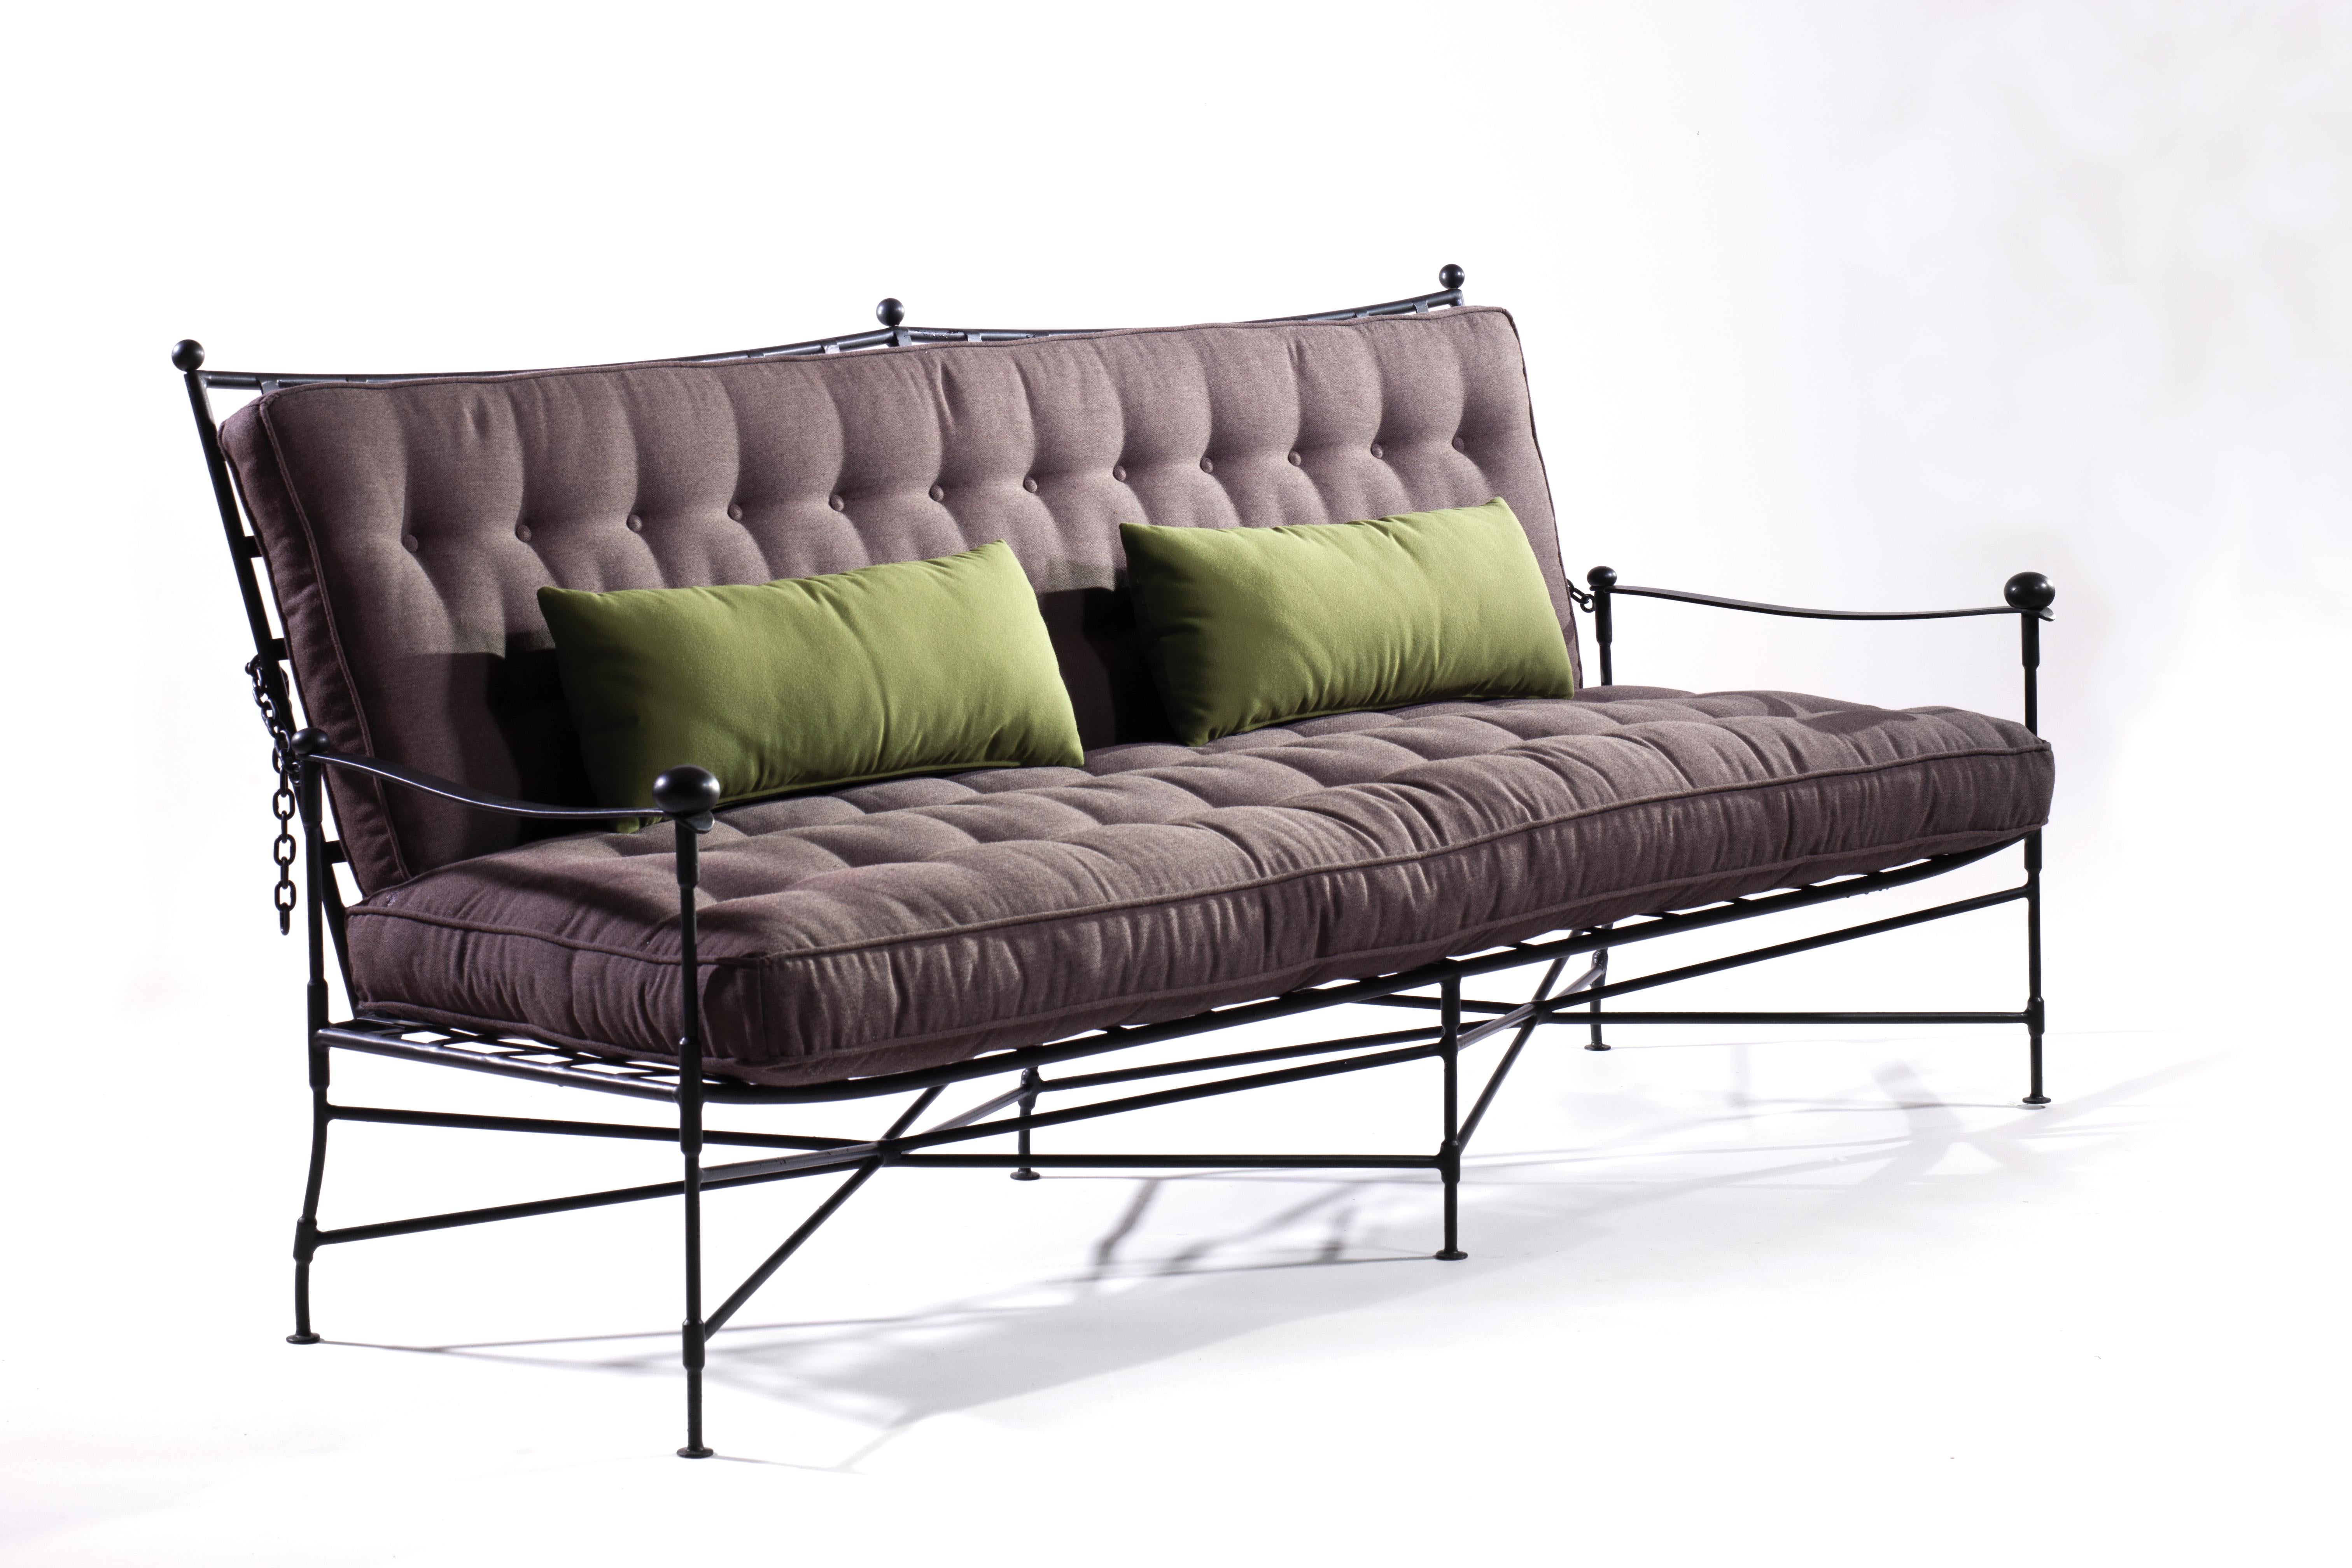 A Classic steel frame sofa with generously crafted buttoned cushions for outside use
B.B. - We make this Iconic 18th century design because it simply sits so well in any exterior space or garden room, beautiful in combination with the classic garden